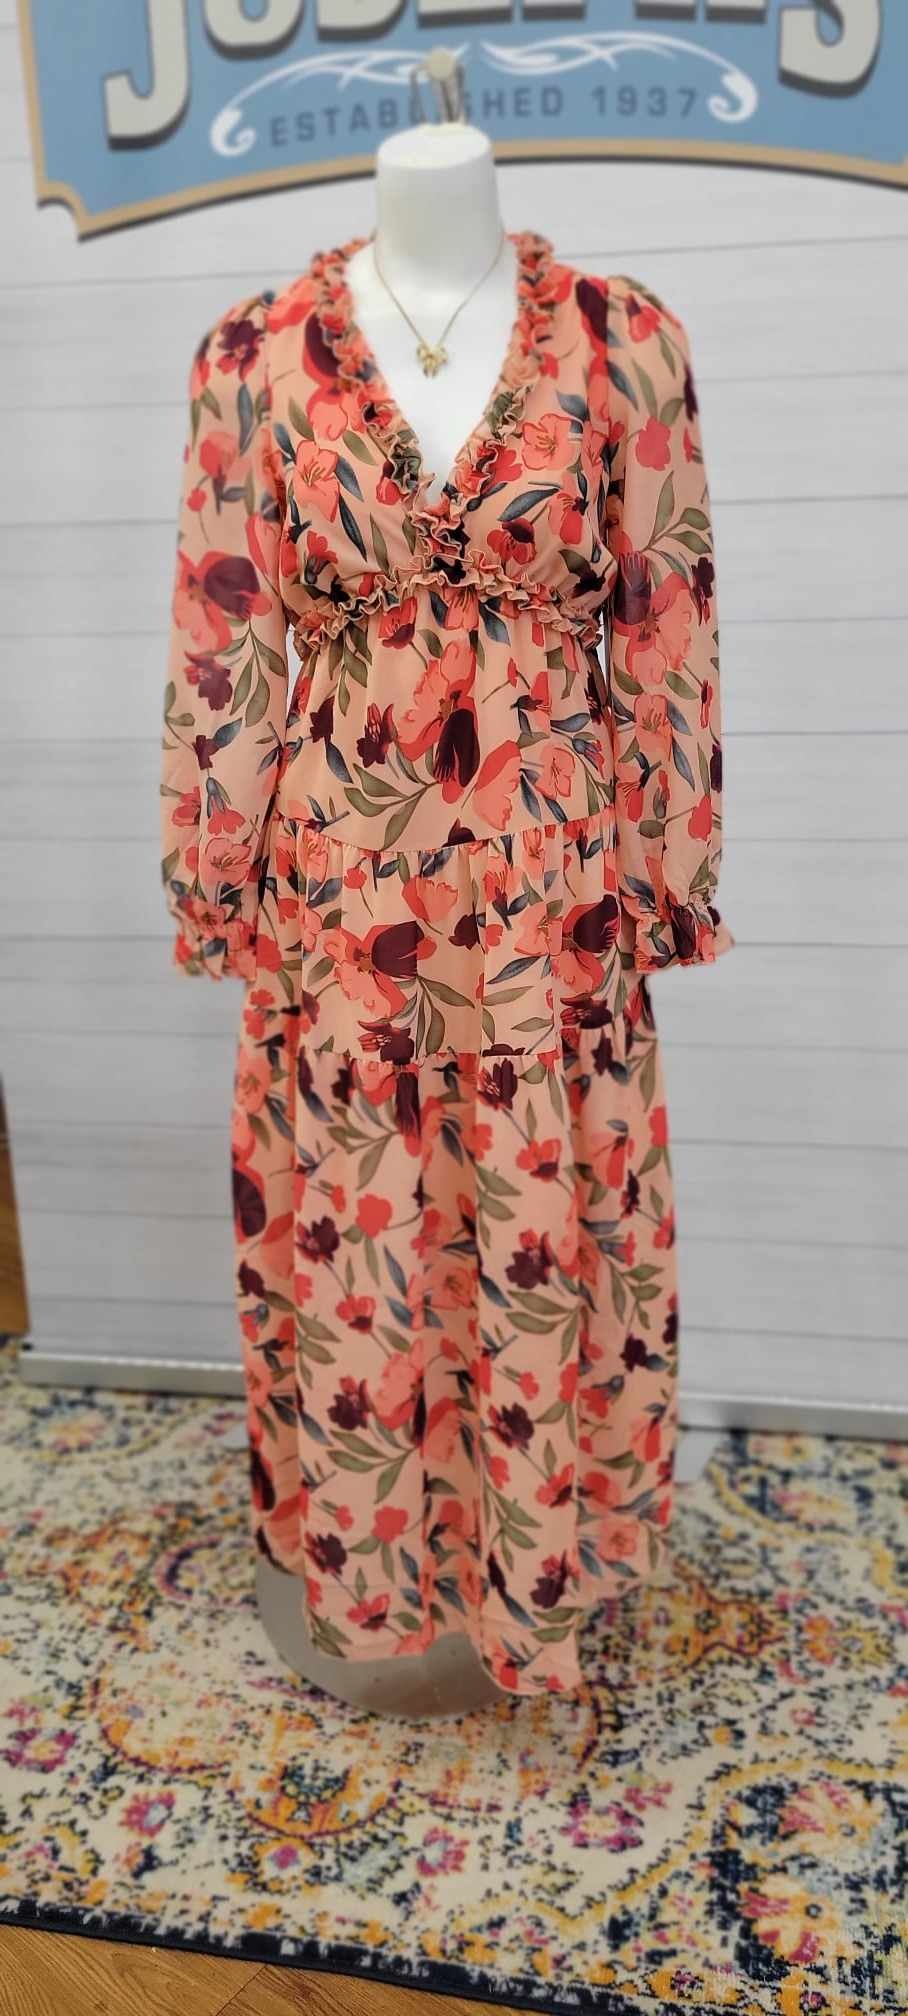 Thomas and Co. LS Blush Floral Dress